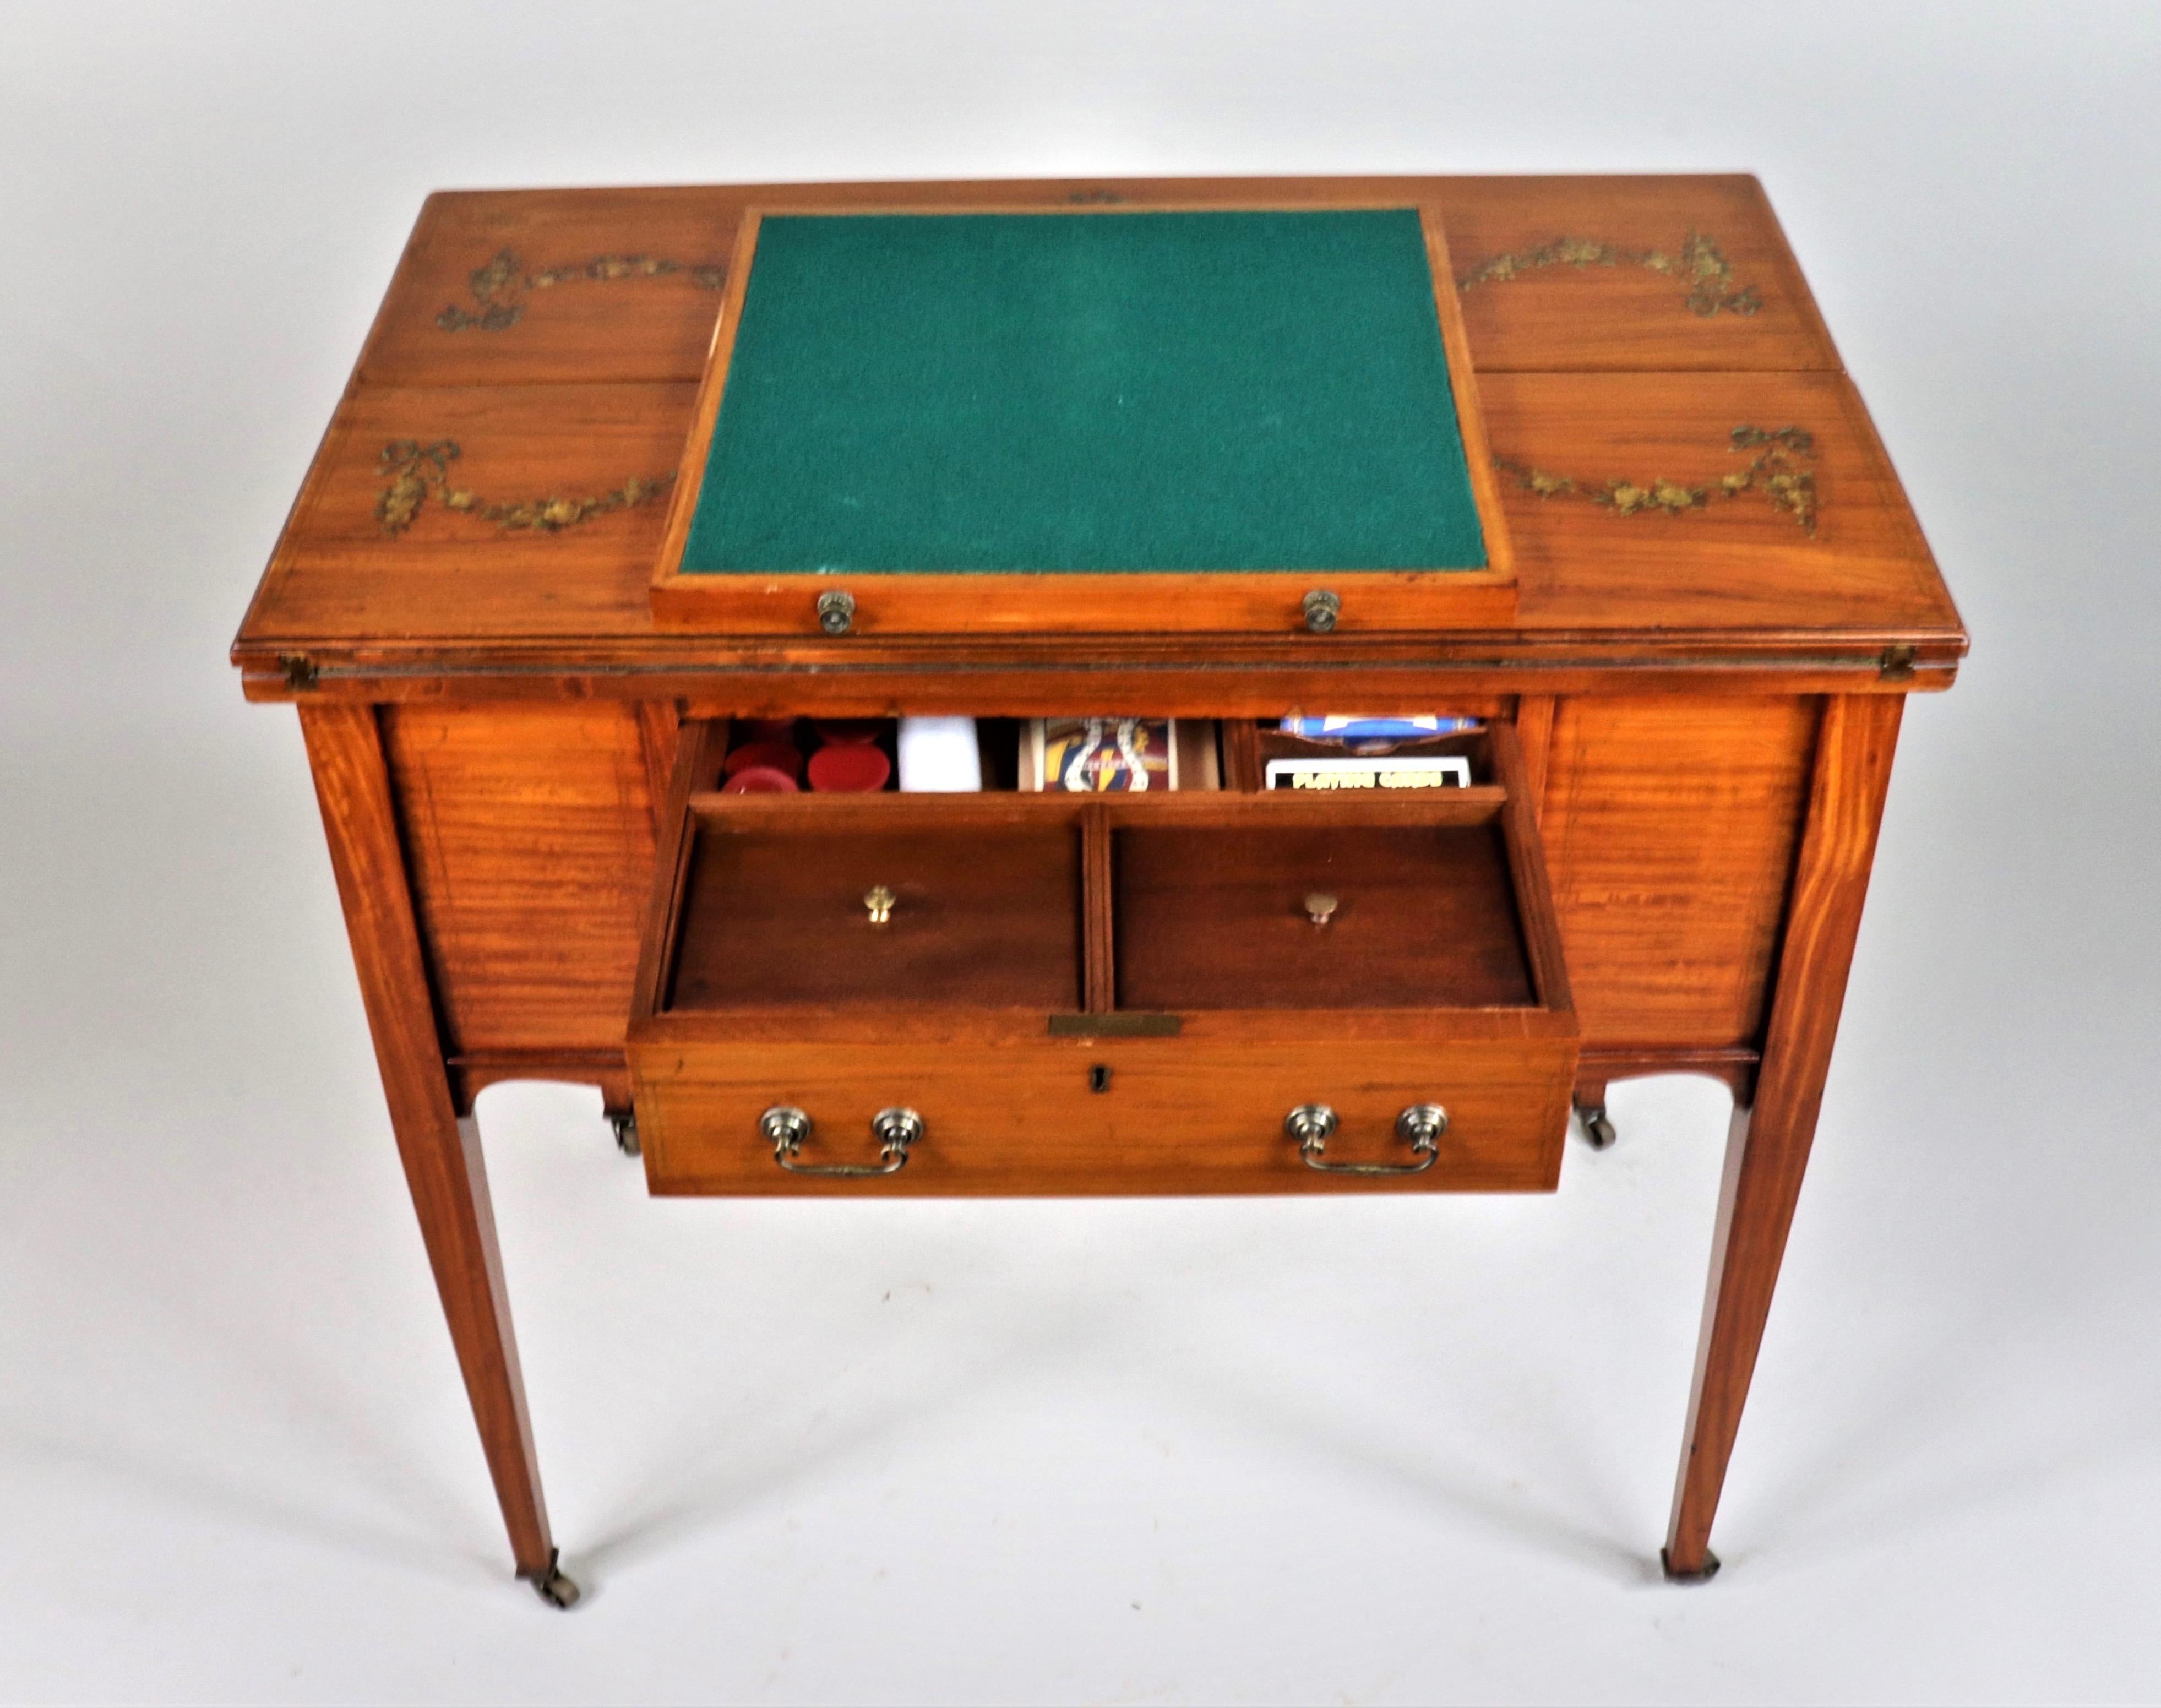 Early 20th Century Edwardian Satinwood Hand-Painted Metamorphic Game Table For Sale